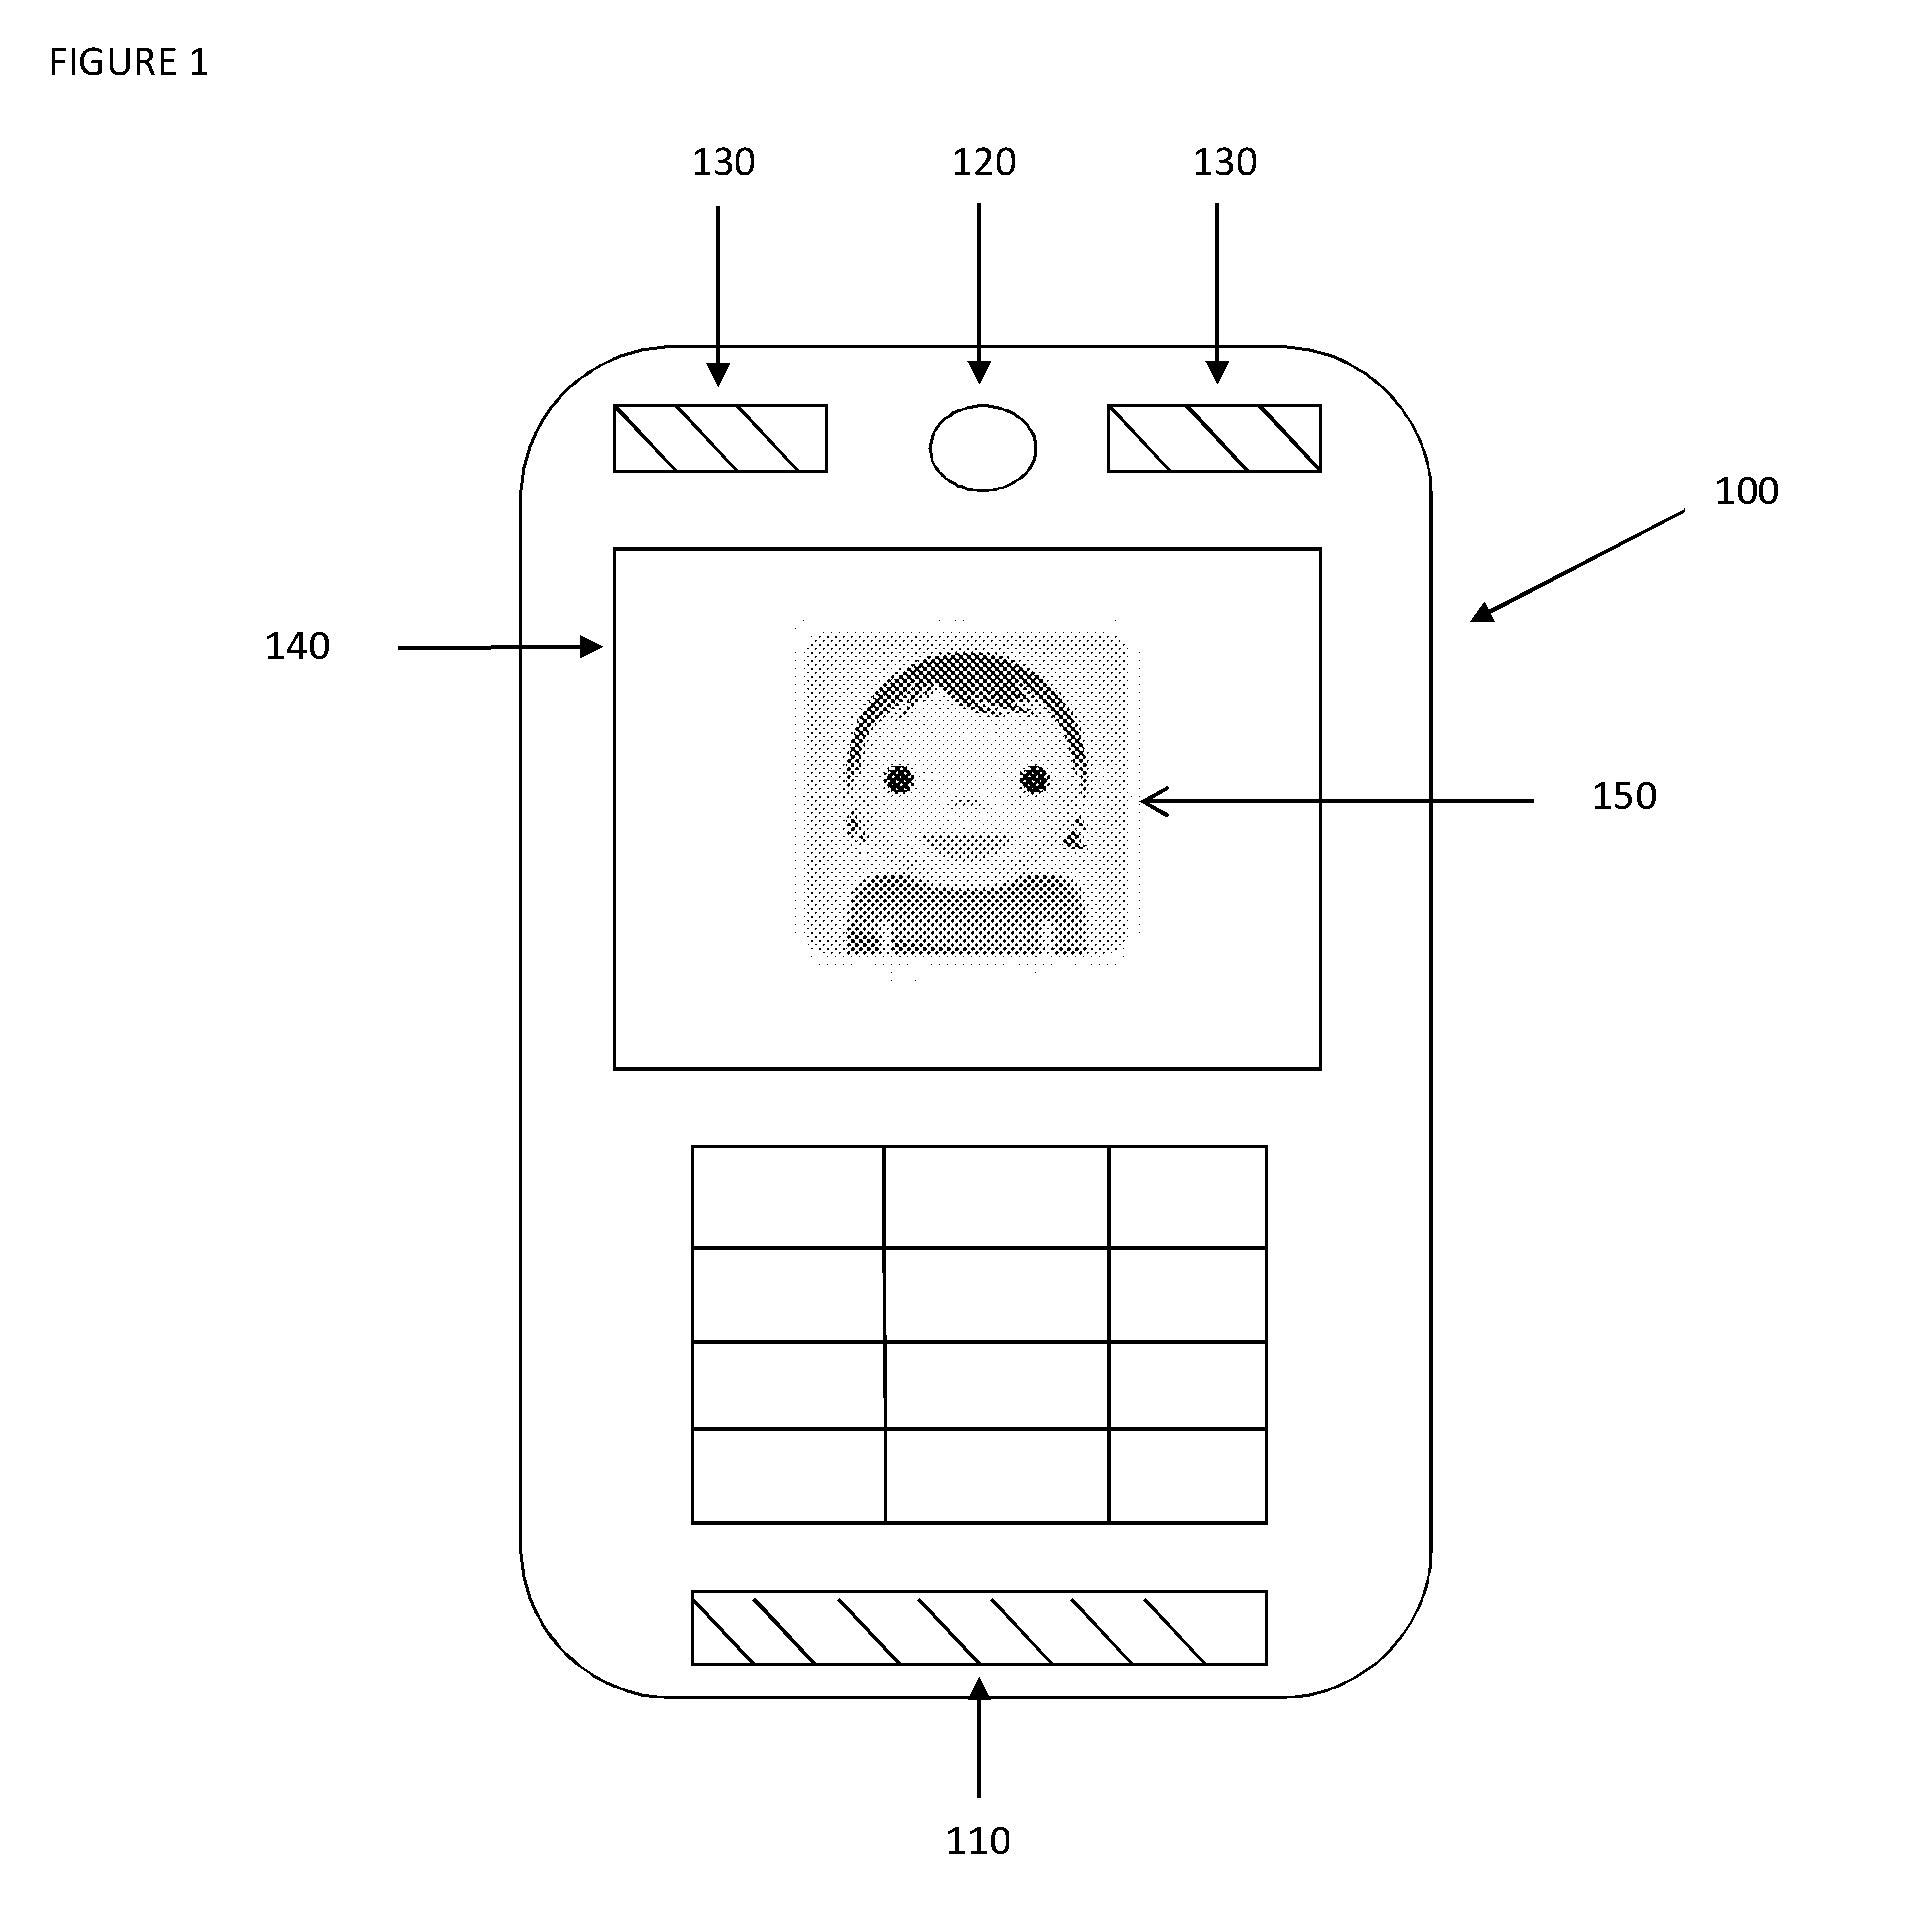 Electronic personal interactive device